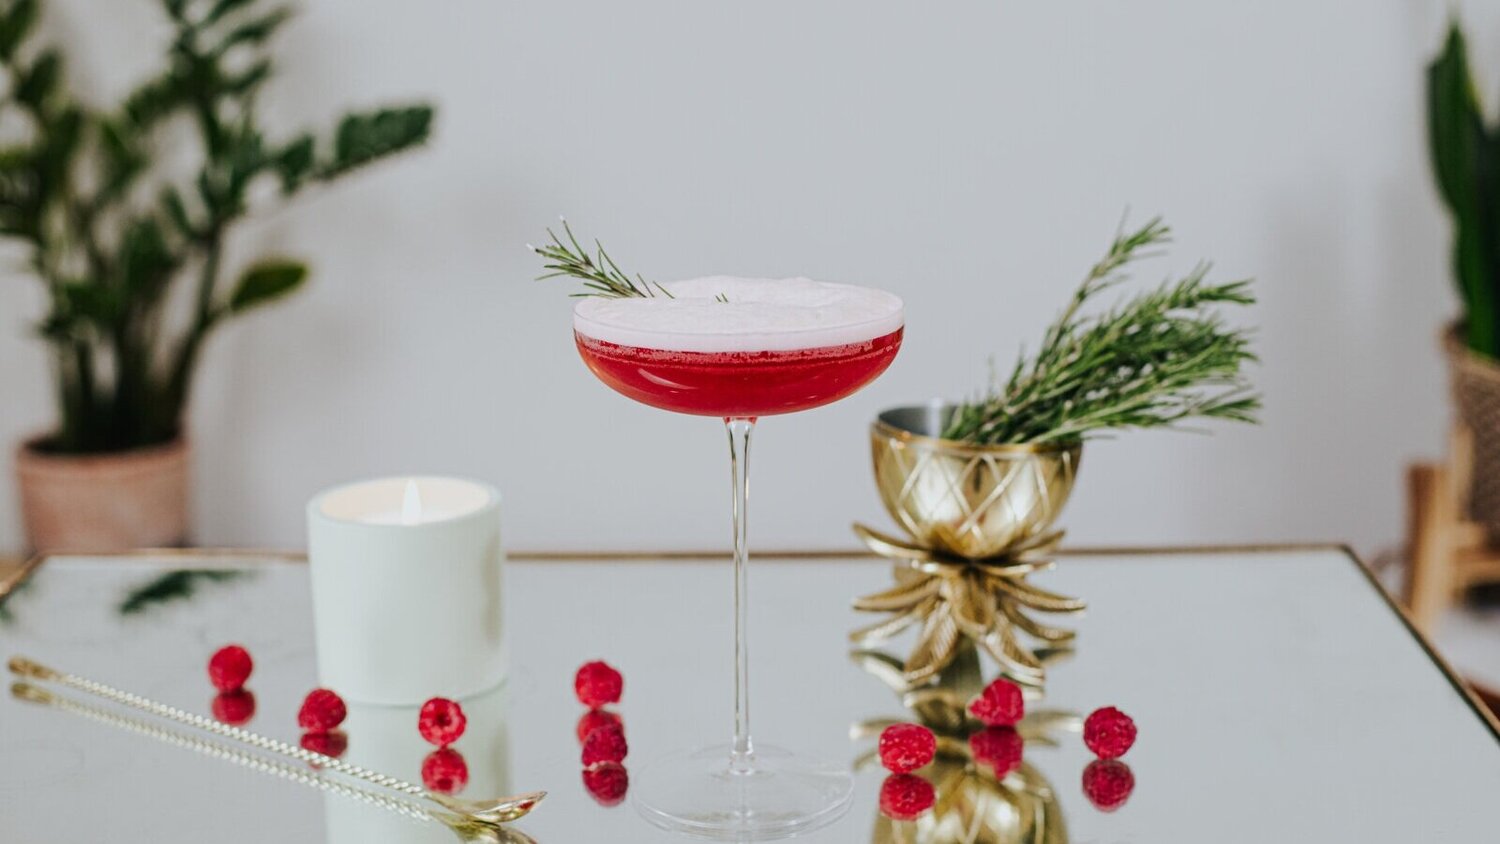 A delicious alcohol-free cocktail - recipe here xx